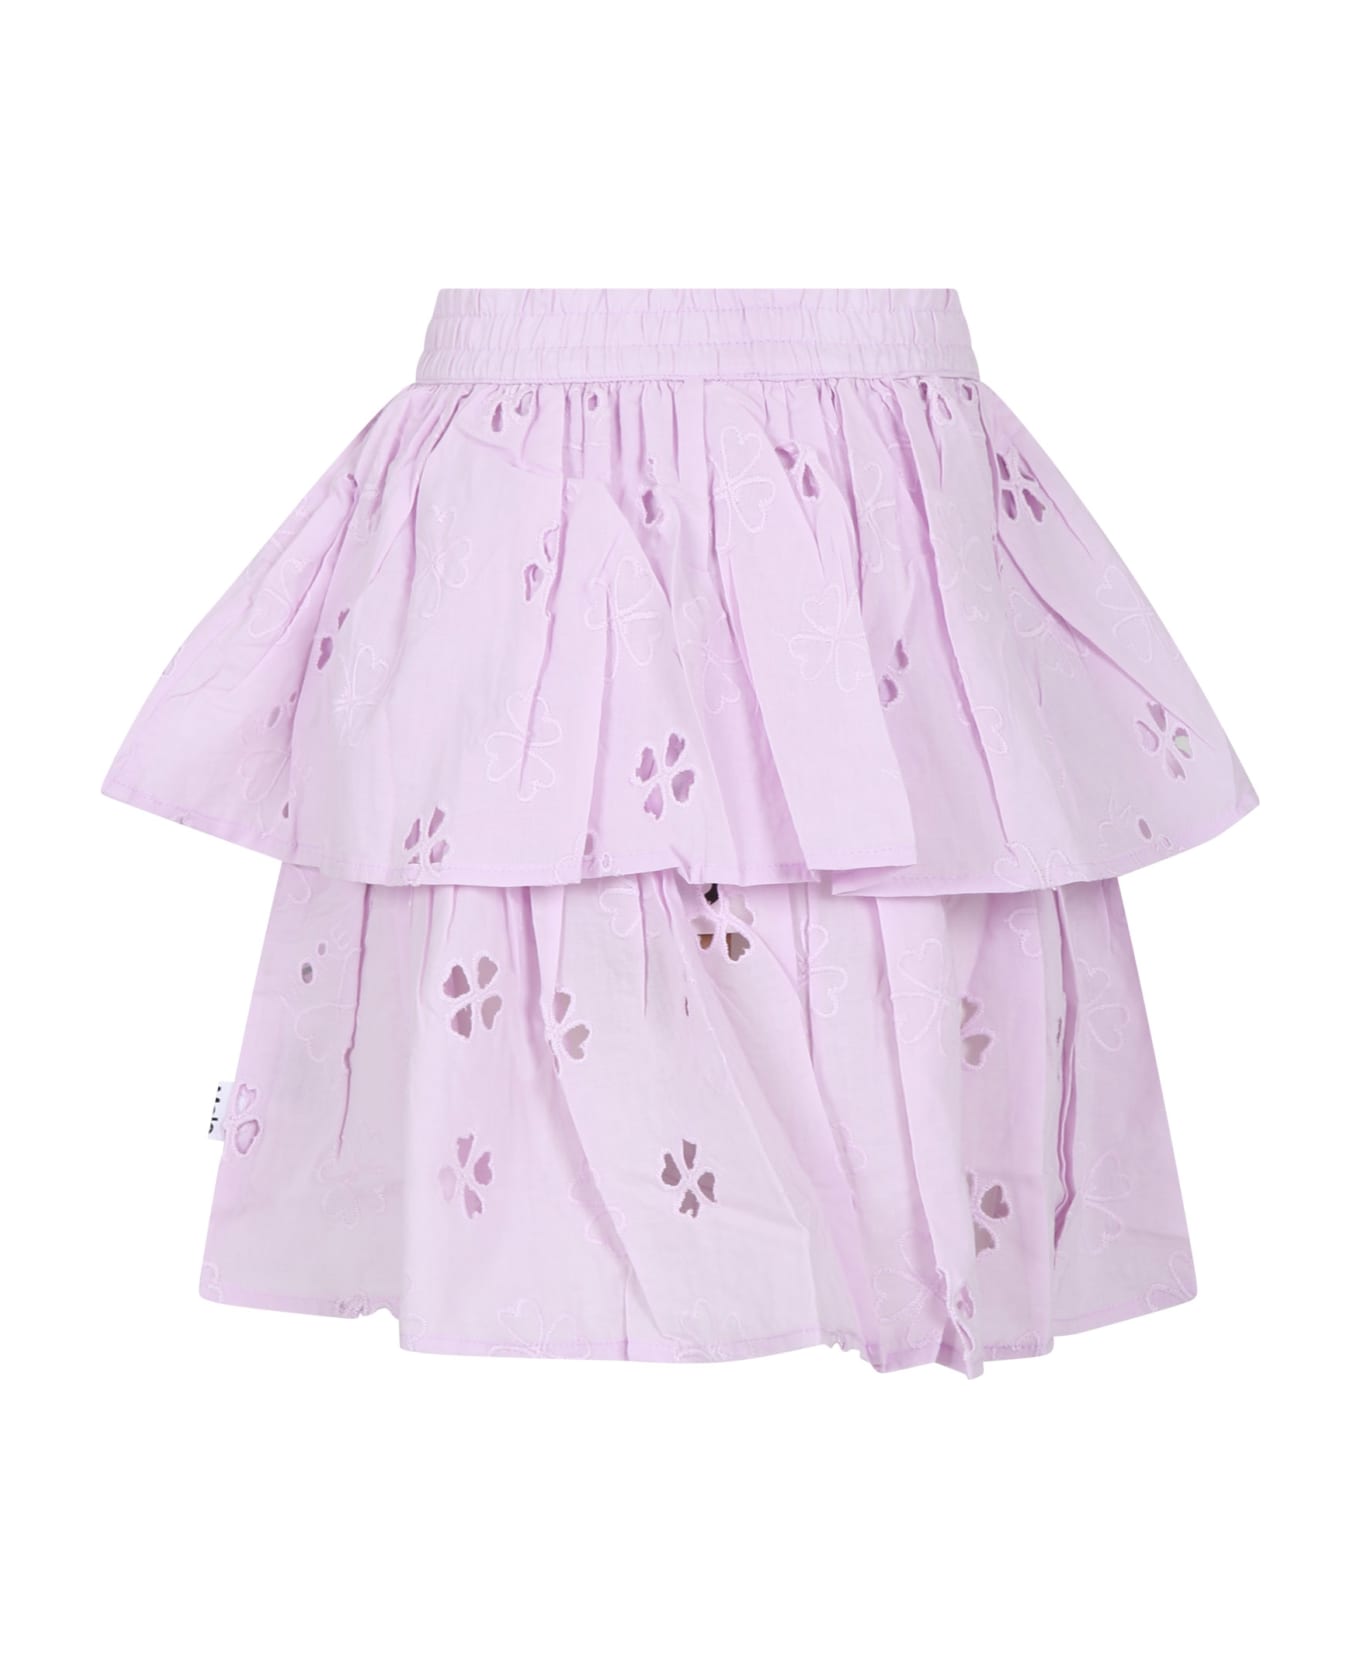 Molo Pink Casual Skirt For Girl With Macramé Lace - Pink ボトムス